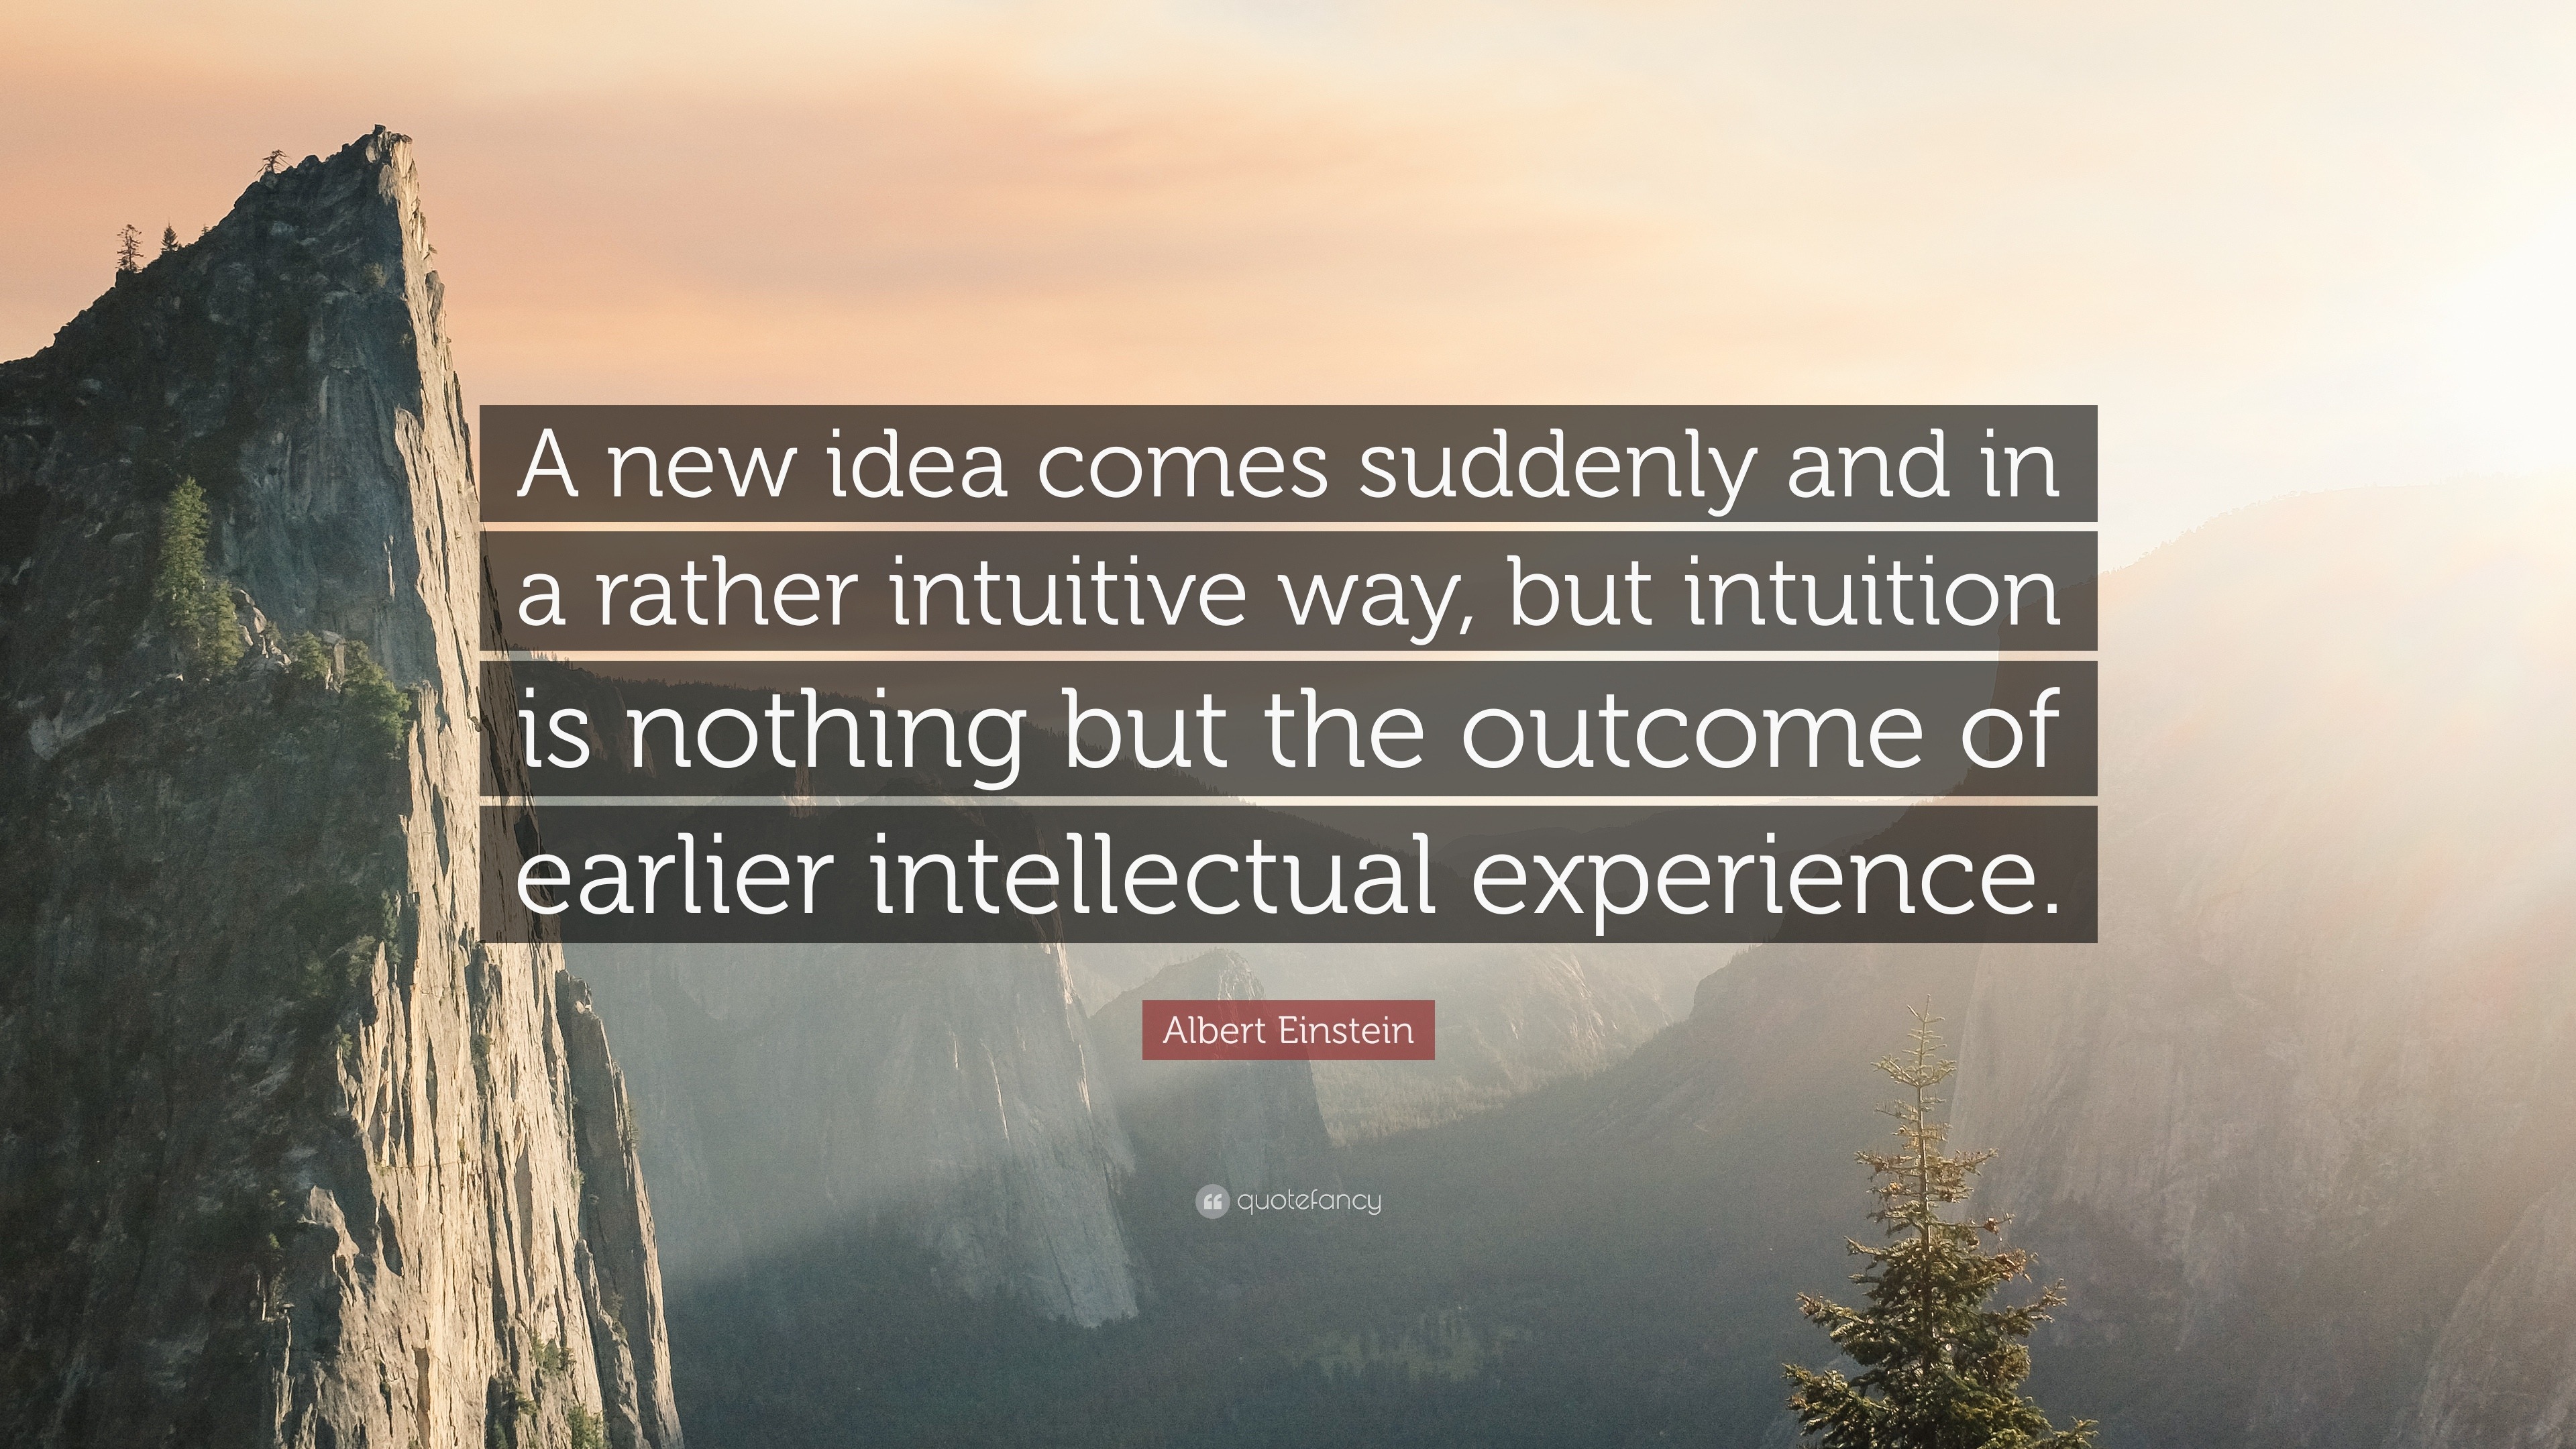 Albert Einstein Quote “A new idea comes suddenly and in a rather